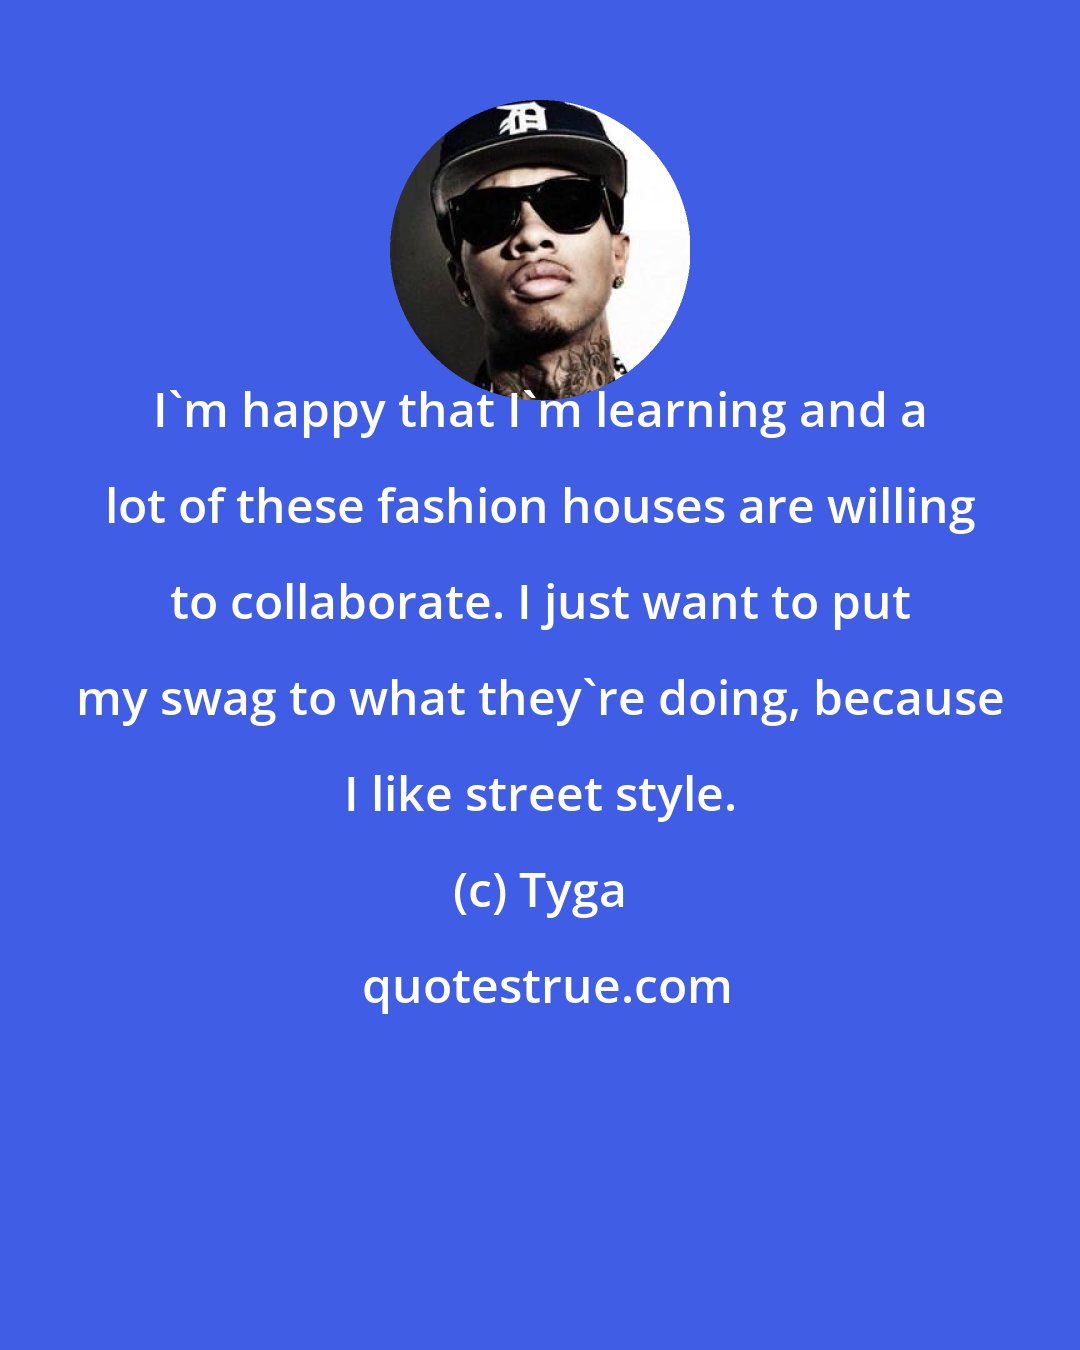 Tyga: I'm happy that I'm learning and a lot of these fashion houses are willing to collaborate. I just want to put my swag to what they're doing, because I like street style.